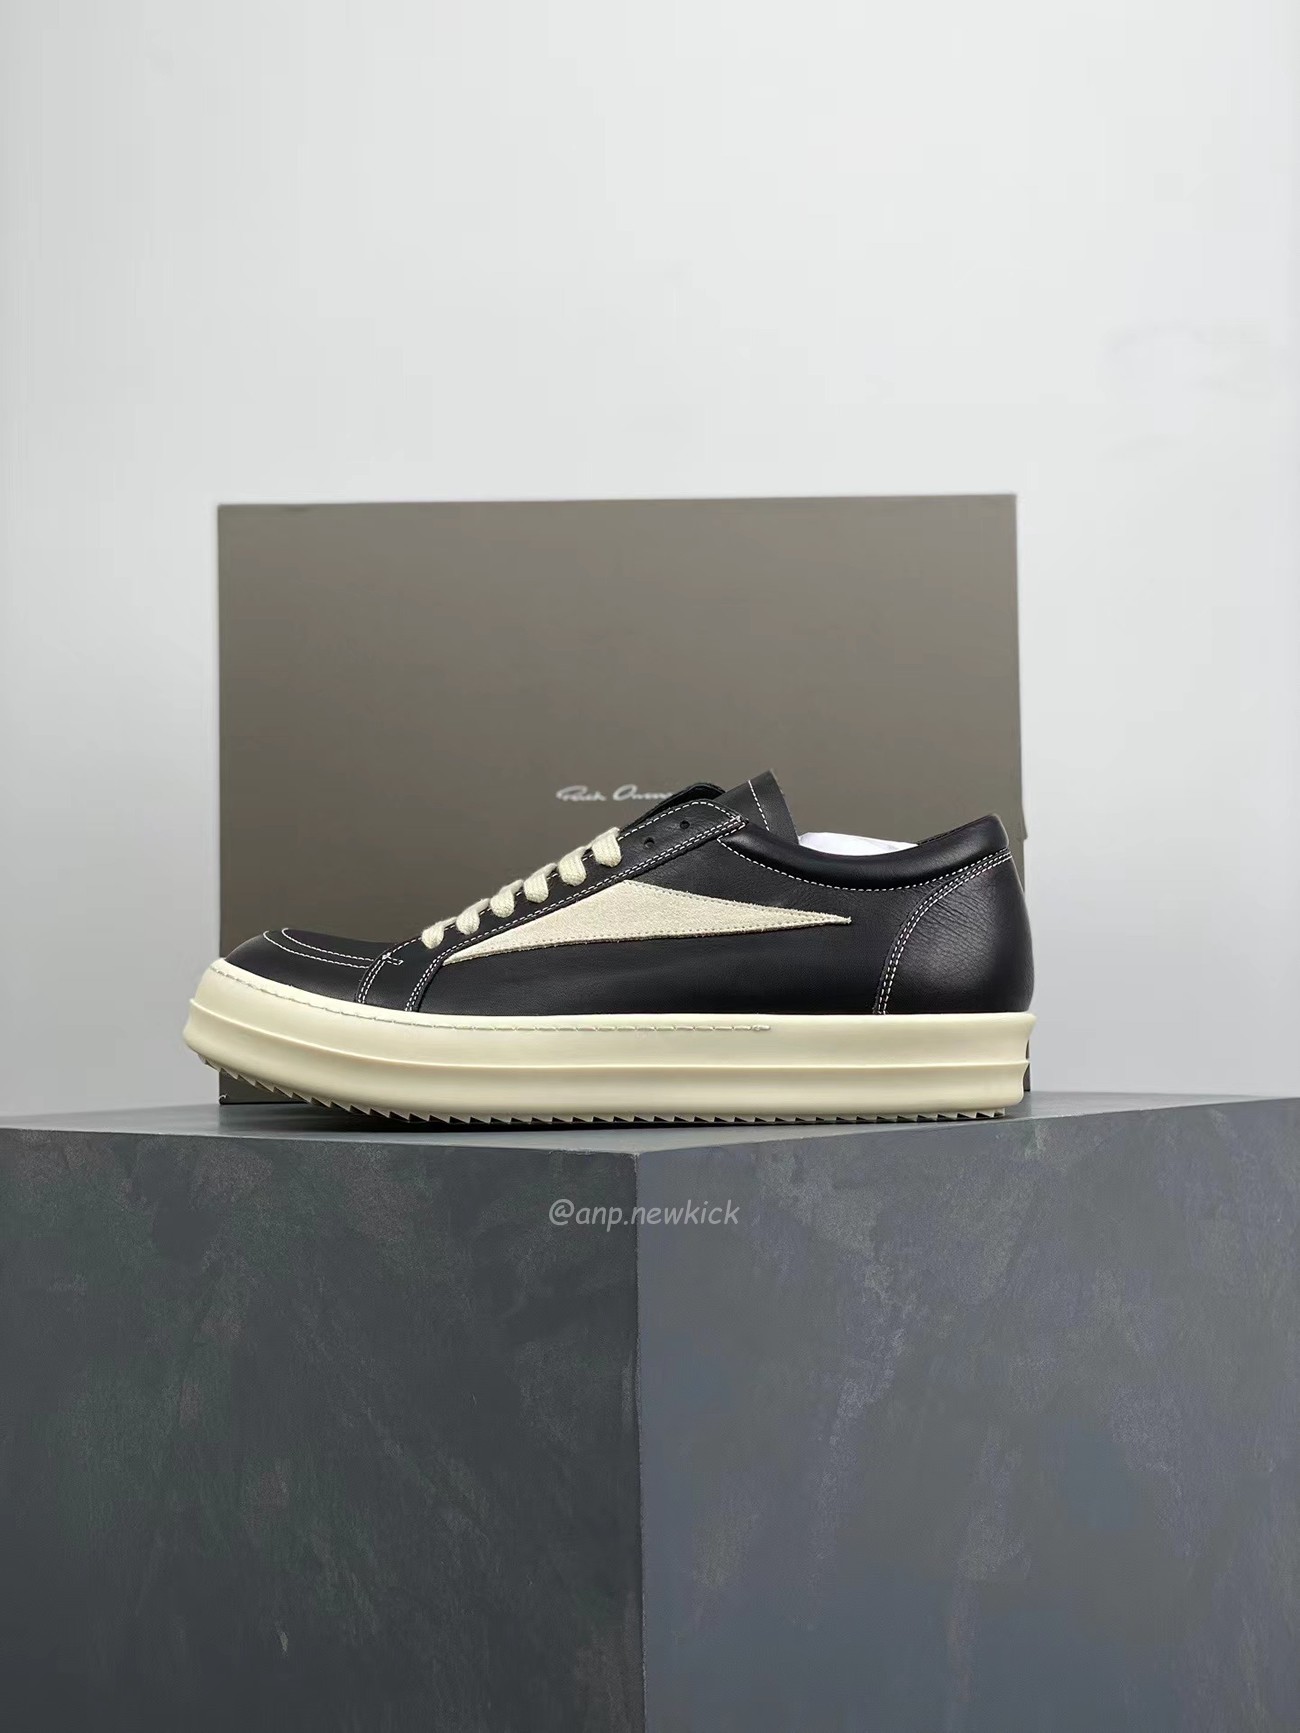 Rick Owens Leather Low Top Vintage Sneakers Suede Canvas Black Taupe Grey Faded Pnk Pearl Milk Dark Dust (8) - newkick.org